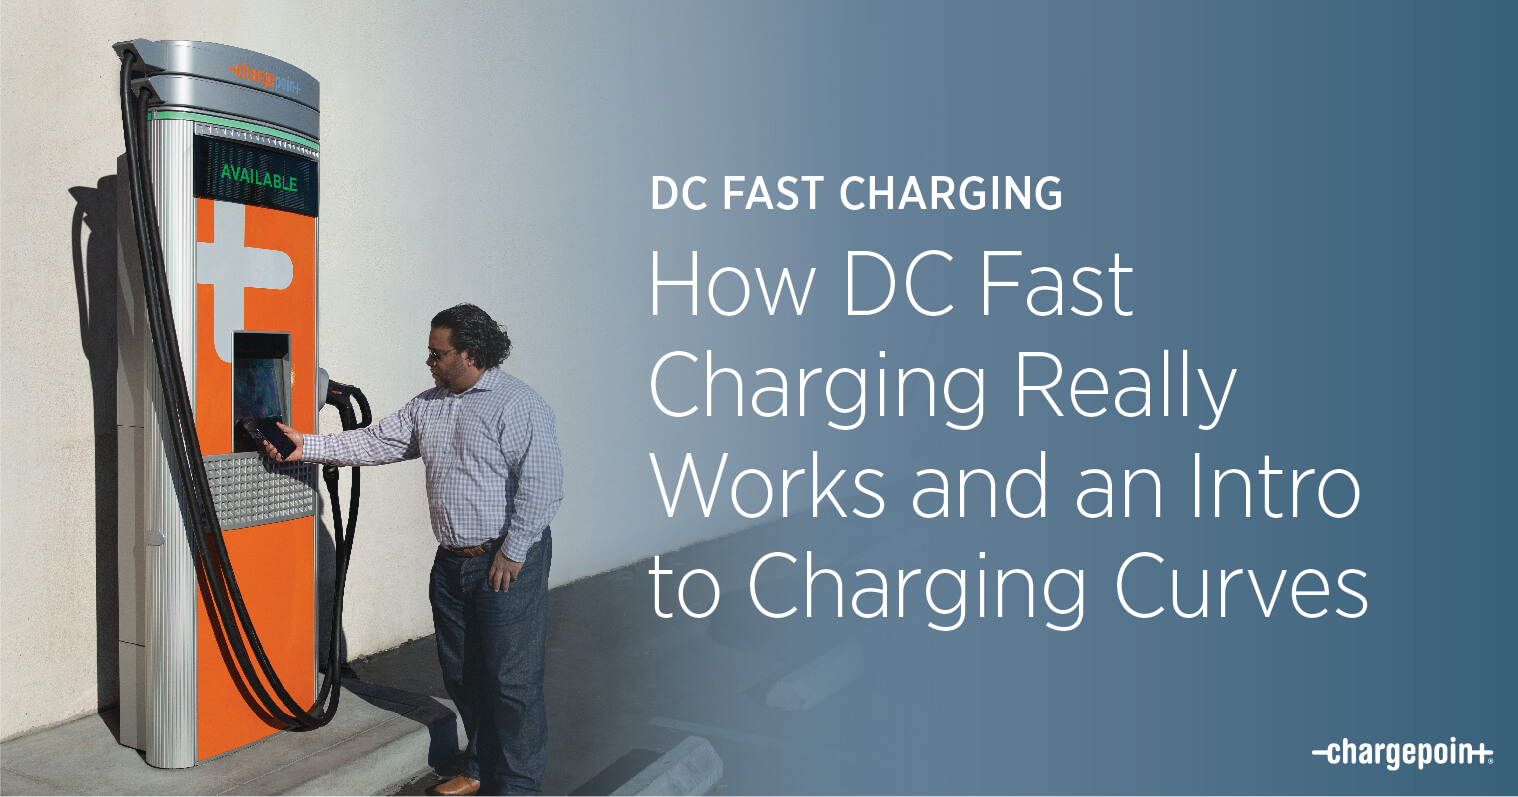 Deep Dive into DC Fast Charging